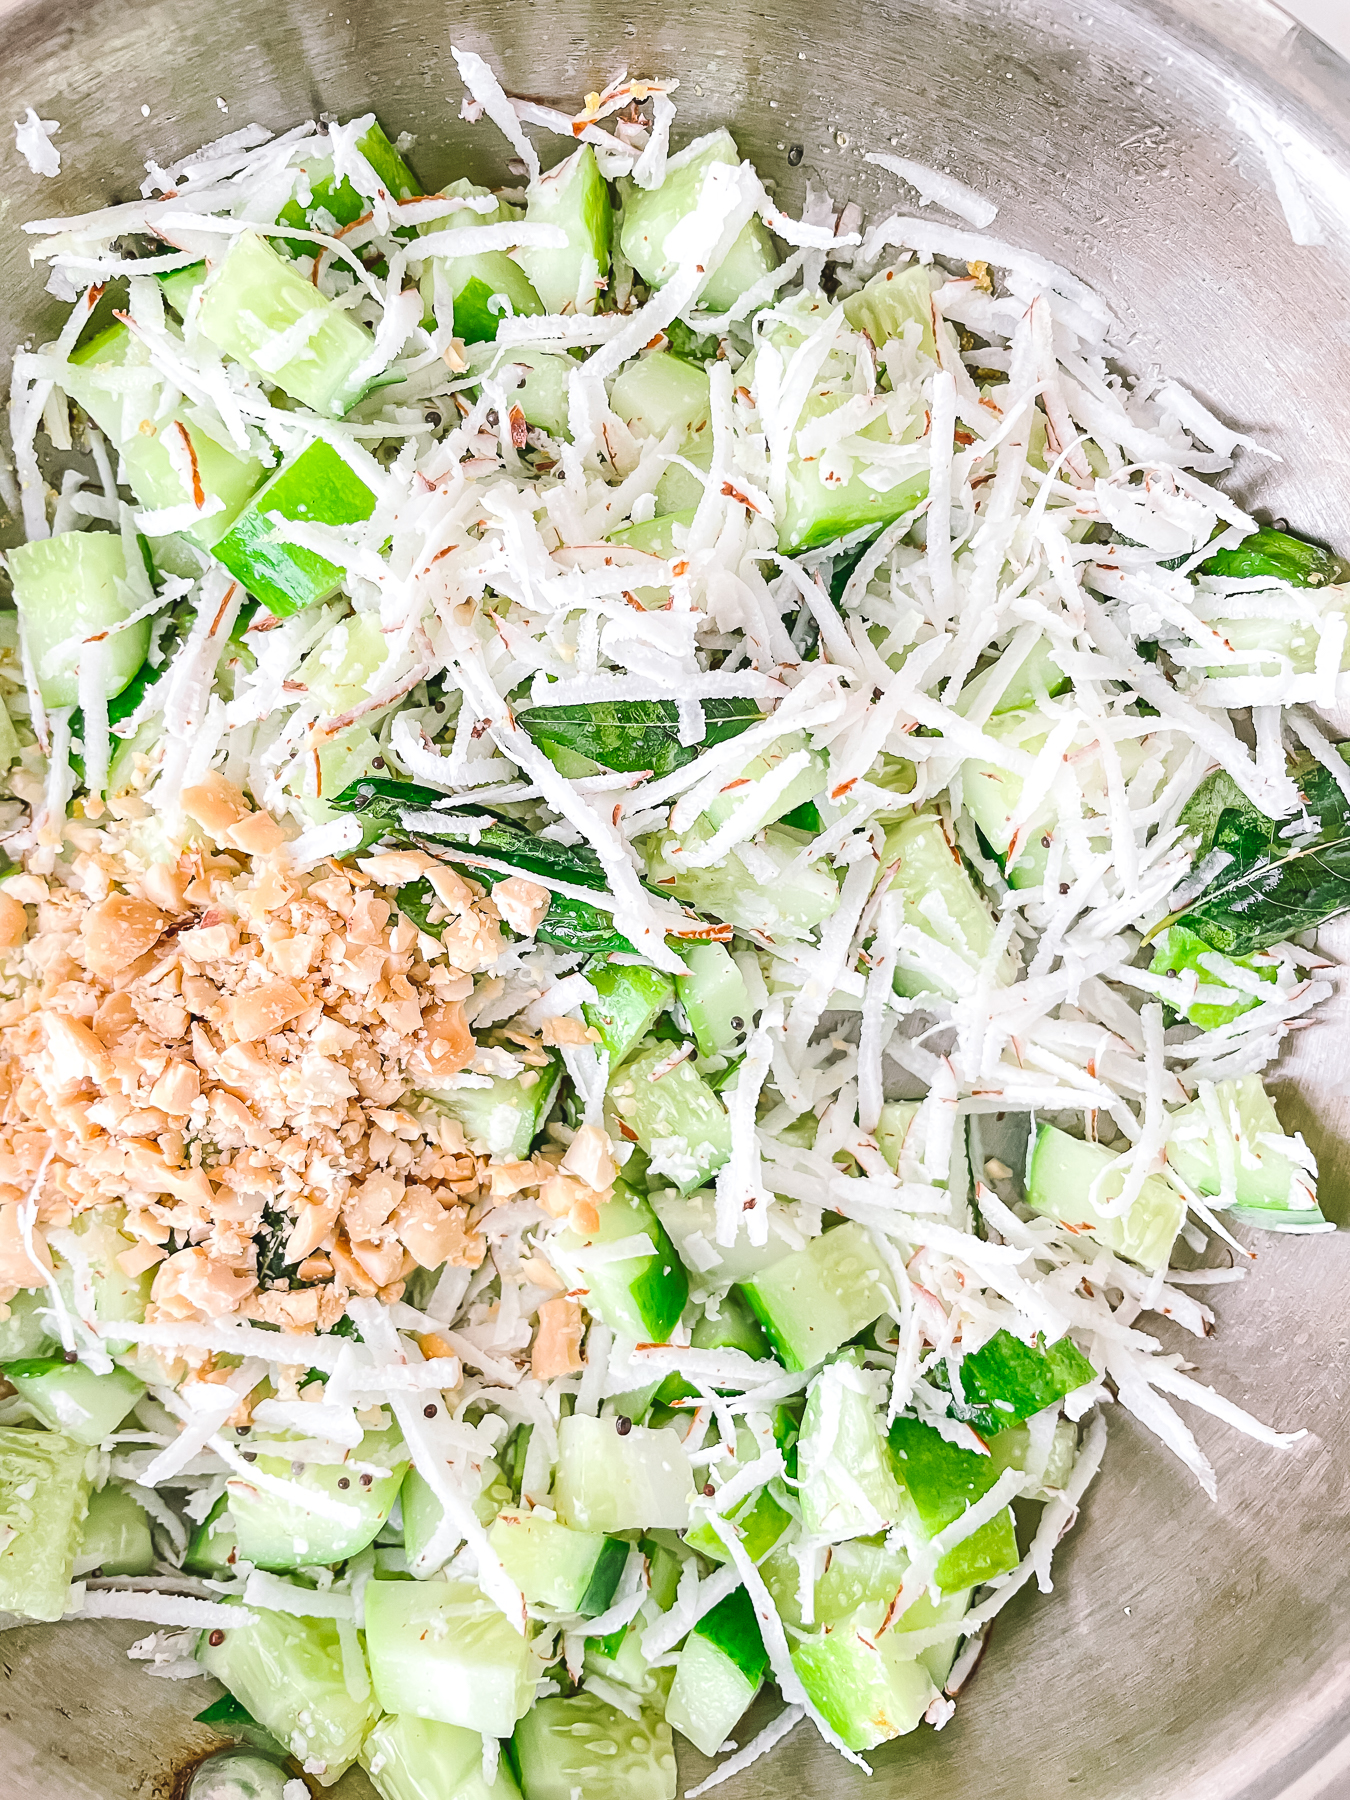 Cucumber chunks, shredded coconut and crushed peanuts poured into a metal bowl but not yet tossed together.